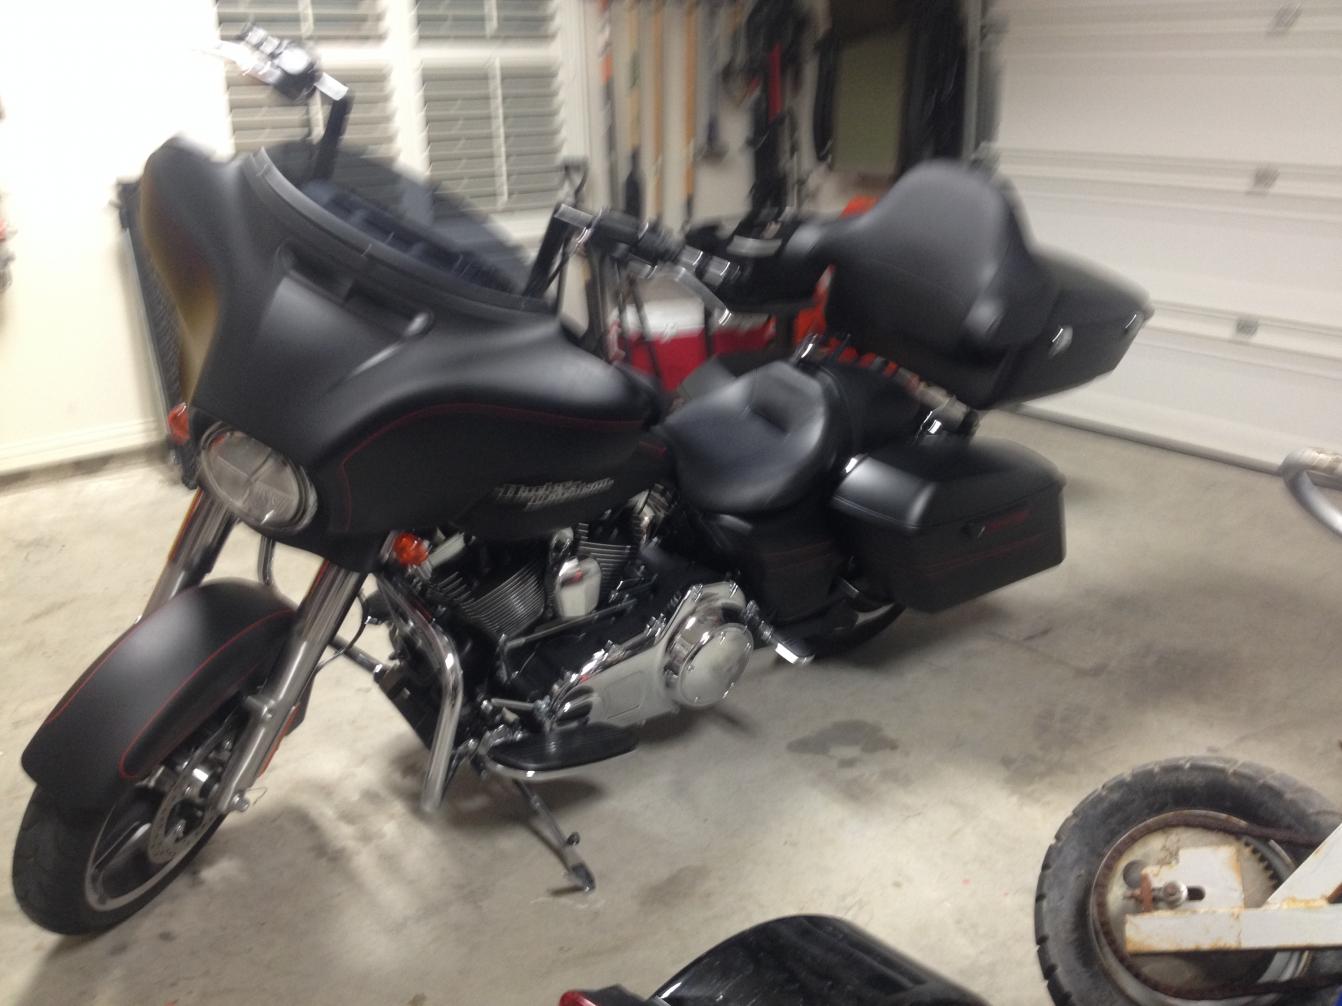 Photos of Your 2014 Street Glide With Tour Pack - Harley ...